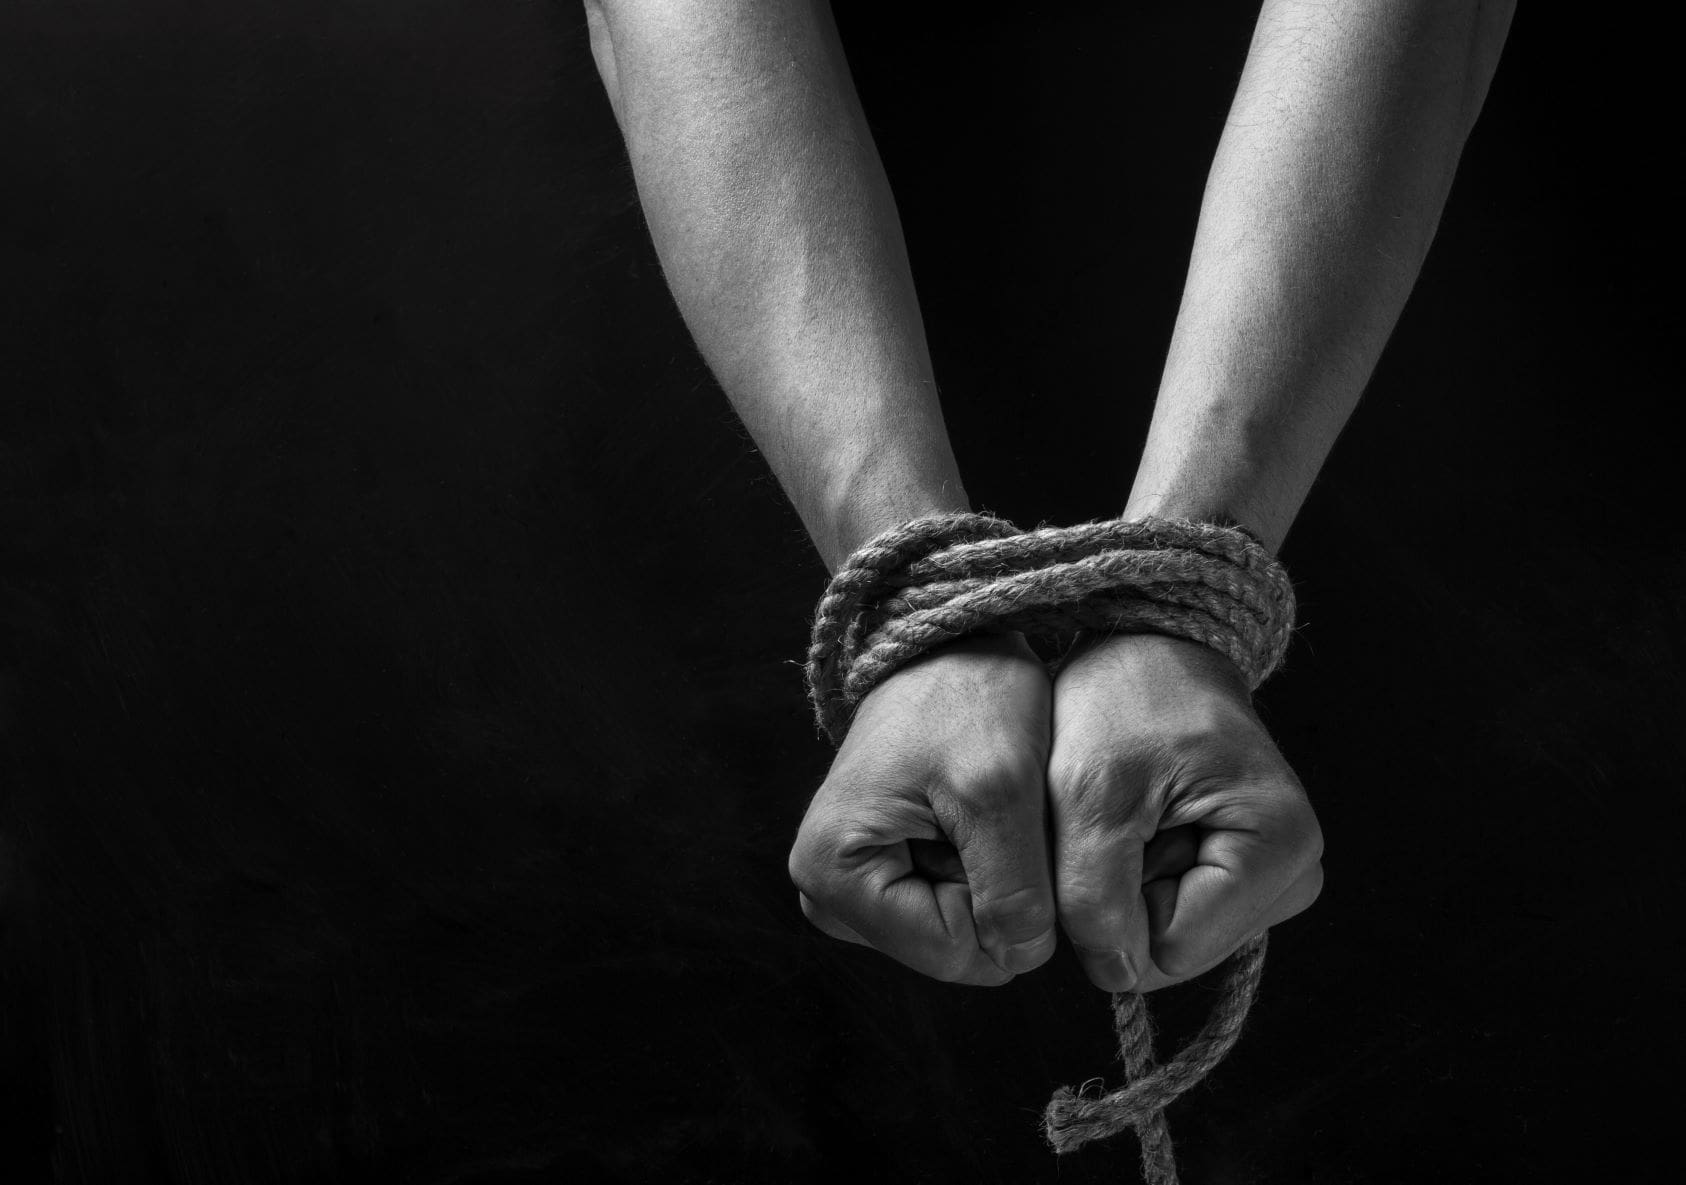 Acknowledging and reporting on modern slavery